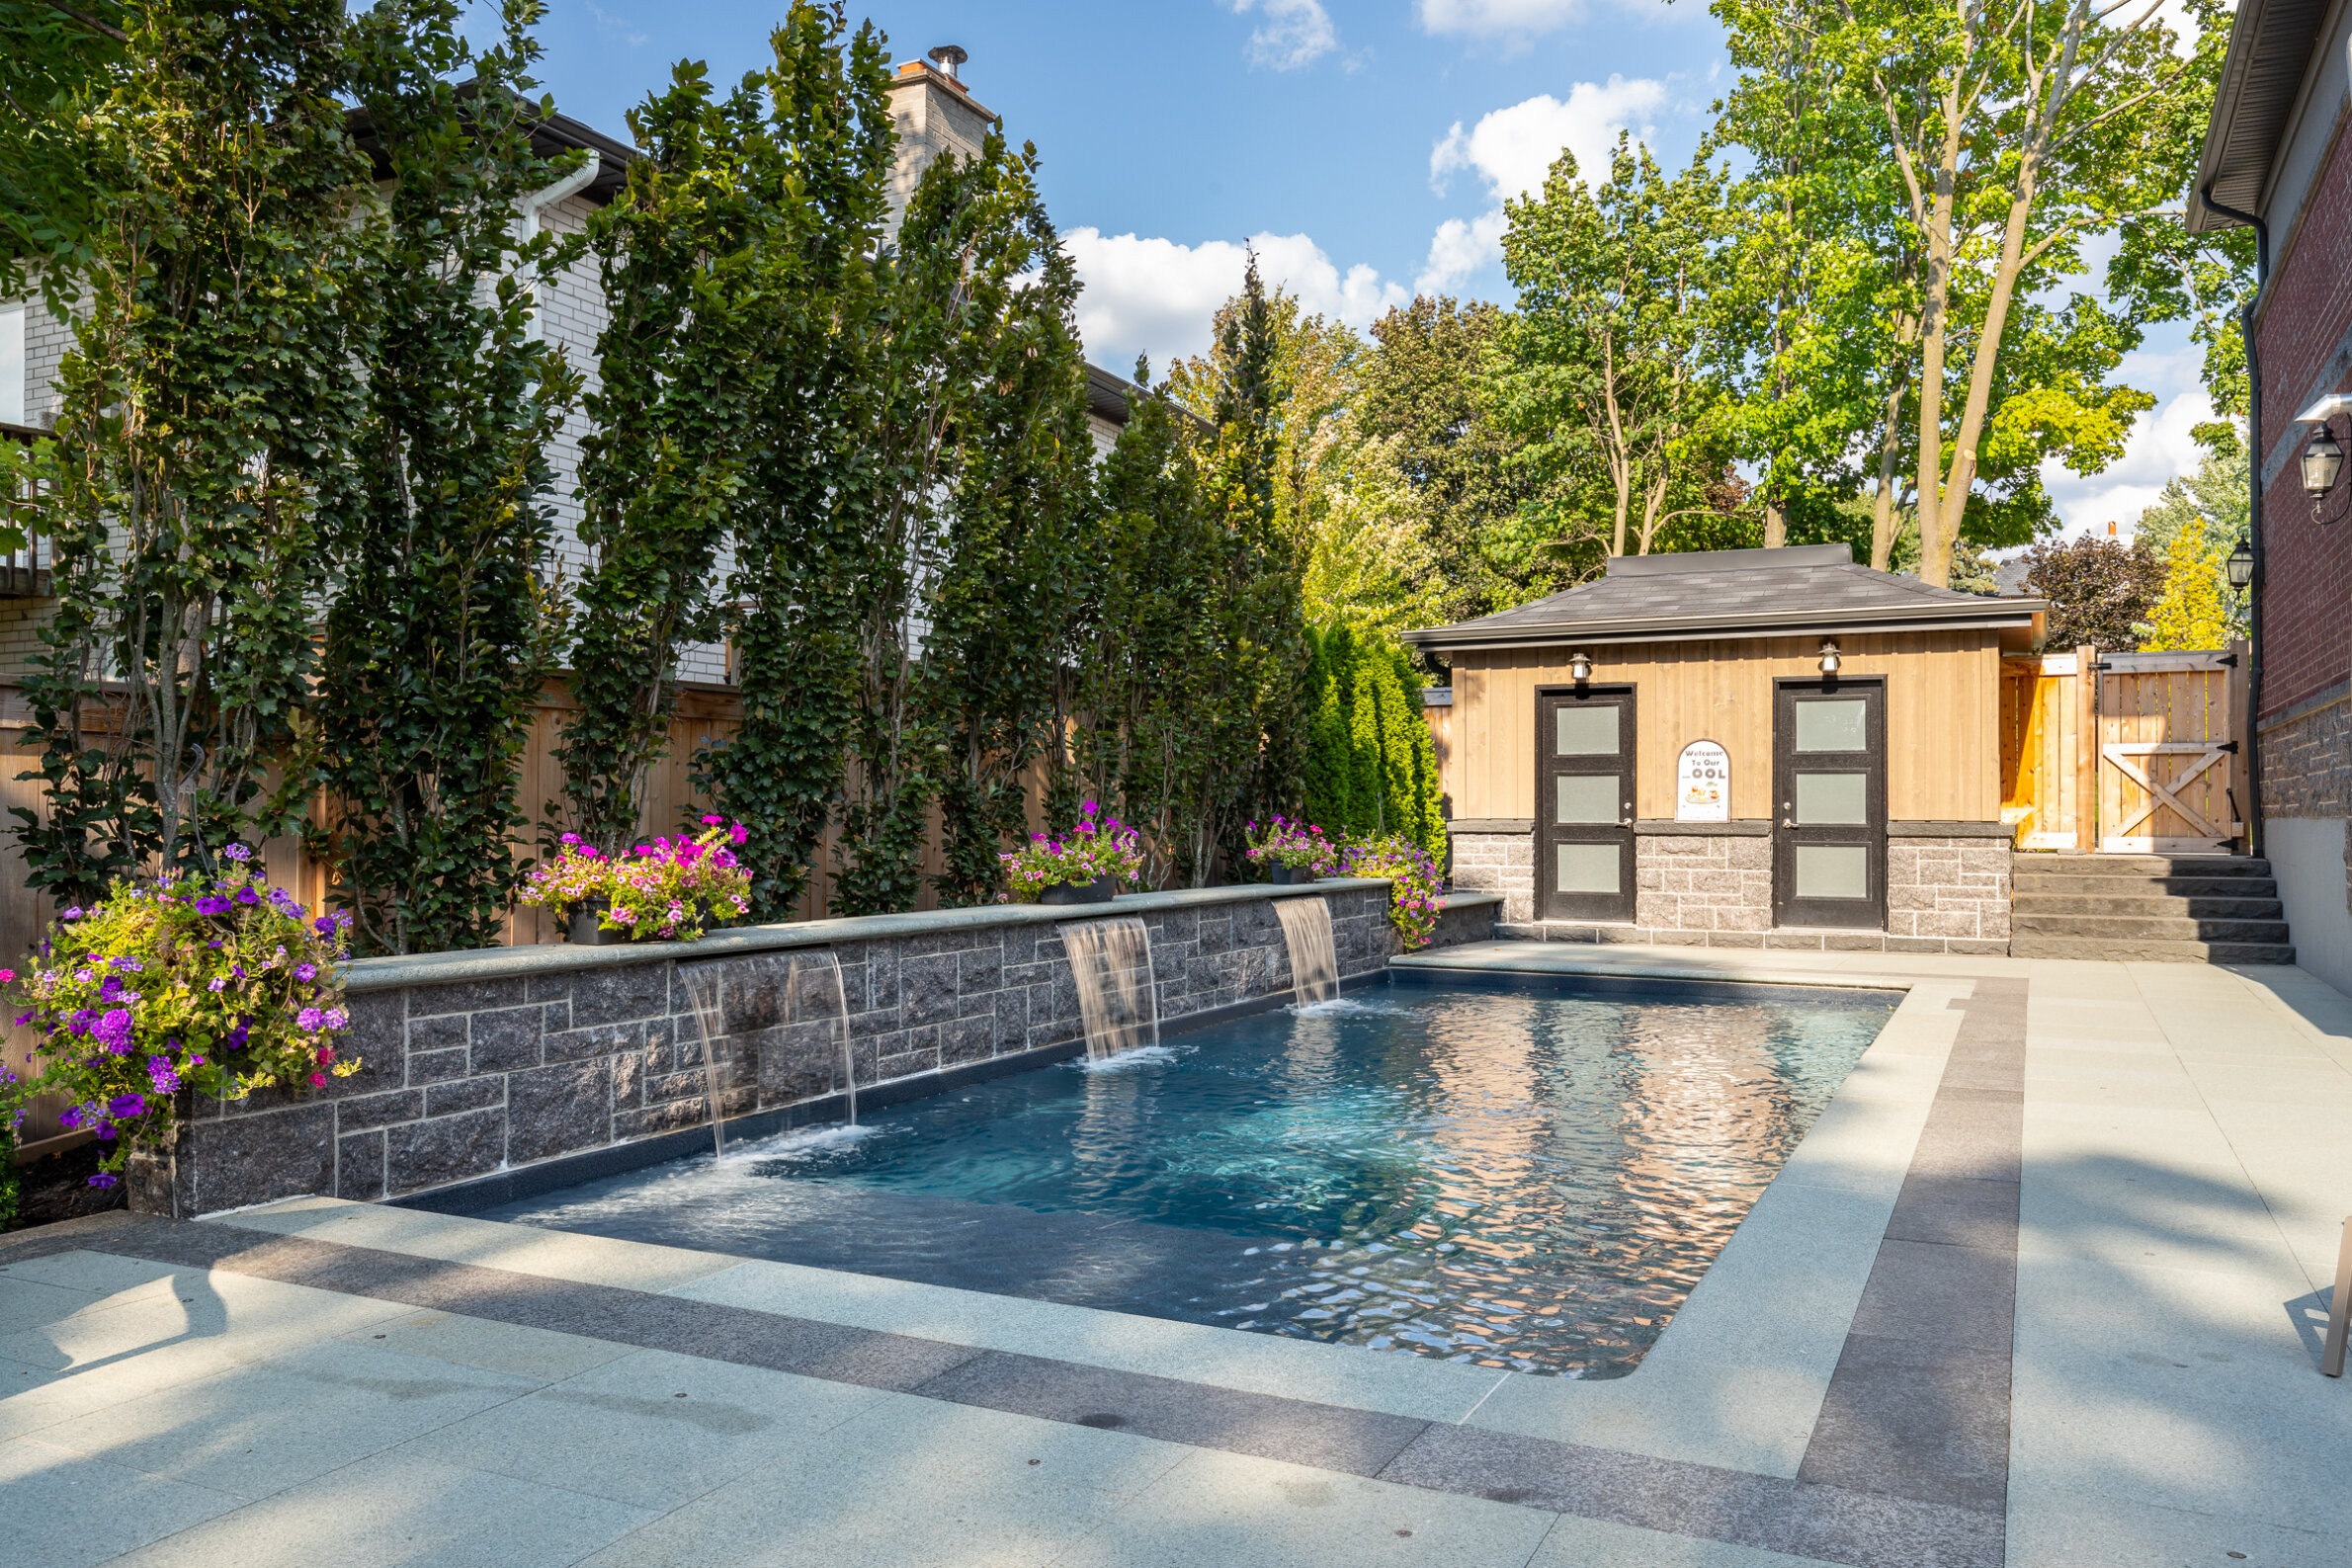 This is a luxurious backyard with a rectangular swimming pool, water features, a stone patio, flowering plants, a garden shed, and tall privacy trees.